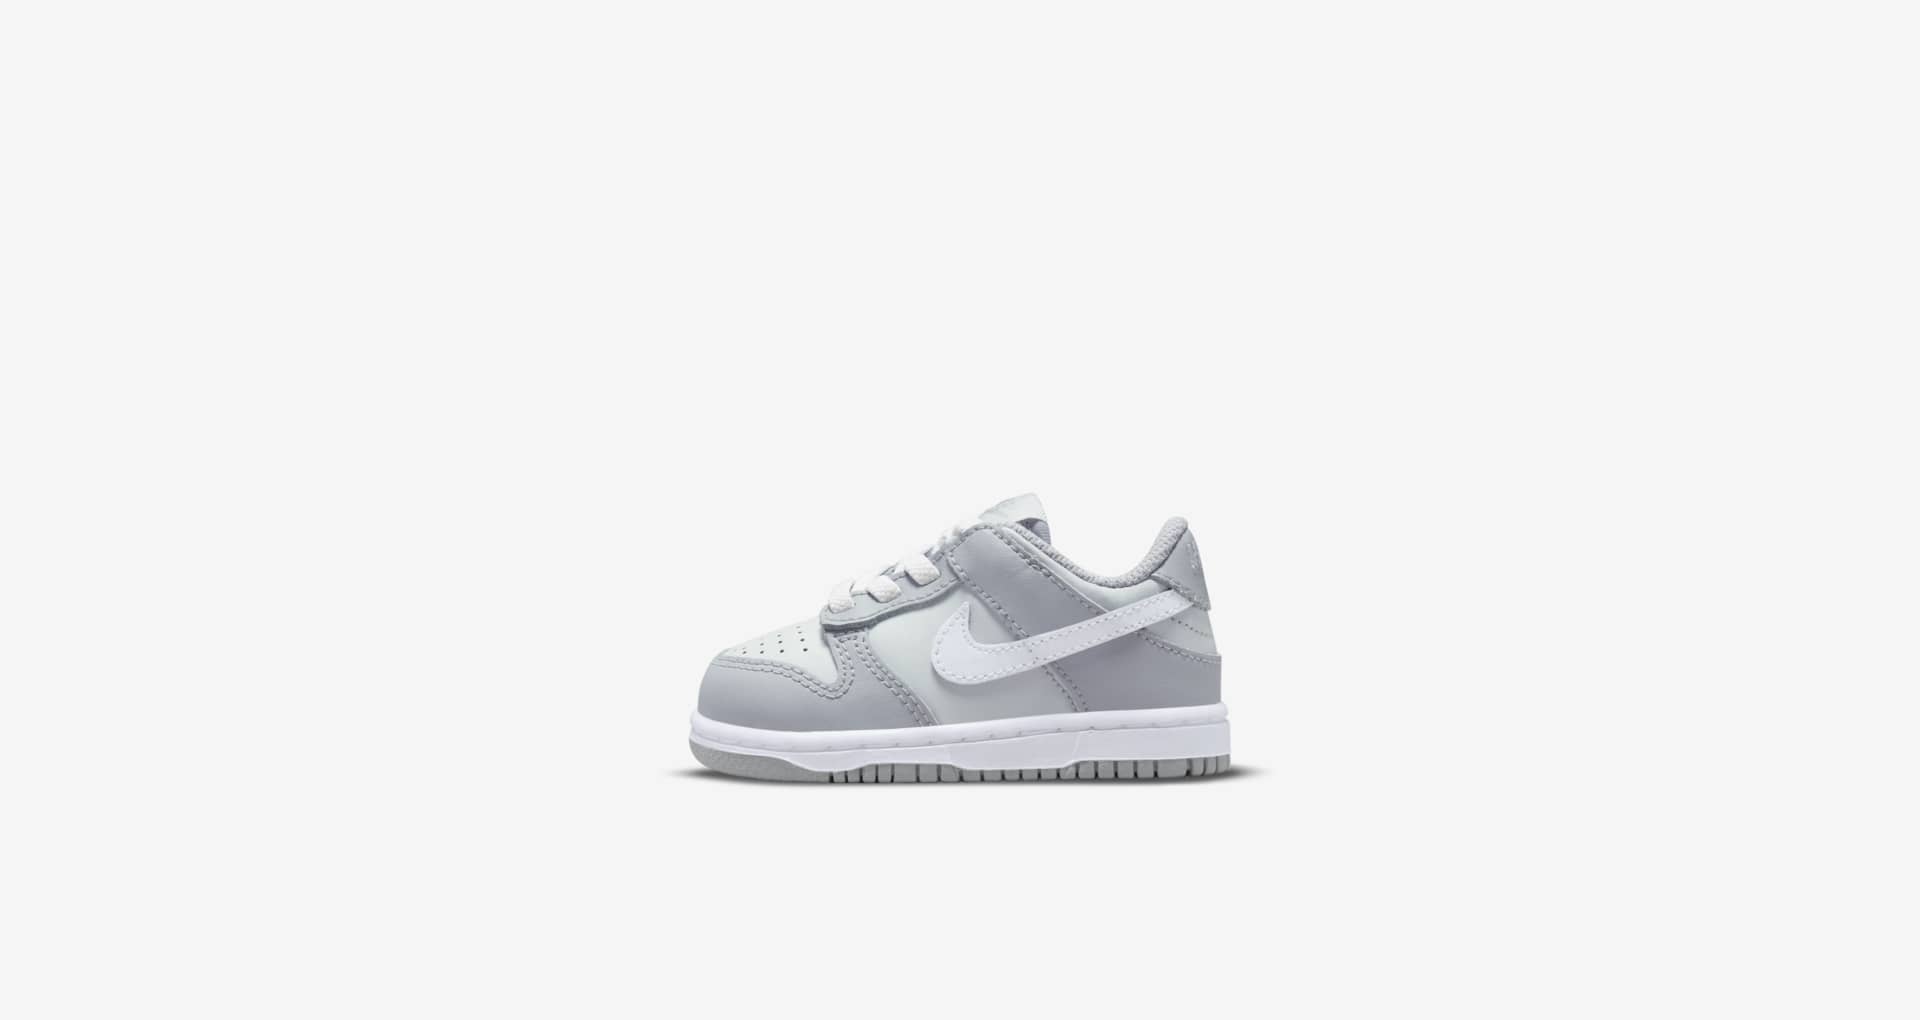 Big Kids' Dunk Low 'Pure Platinum' (DH9765-001) Release Date. Nike SNKRS IN